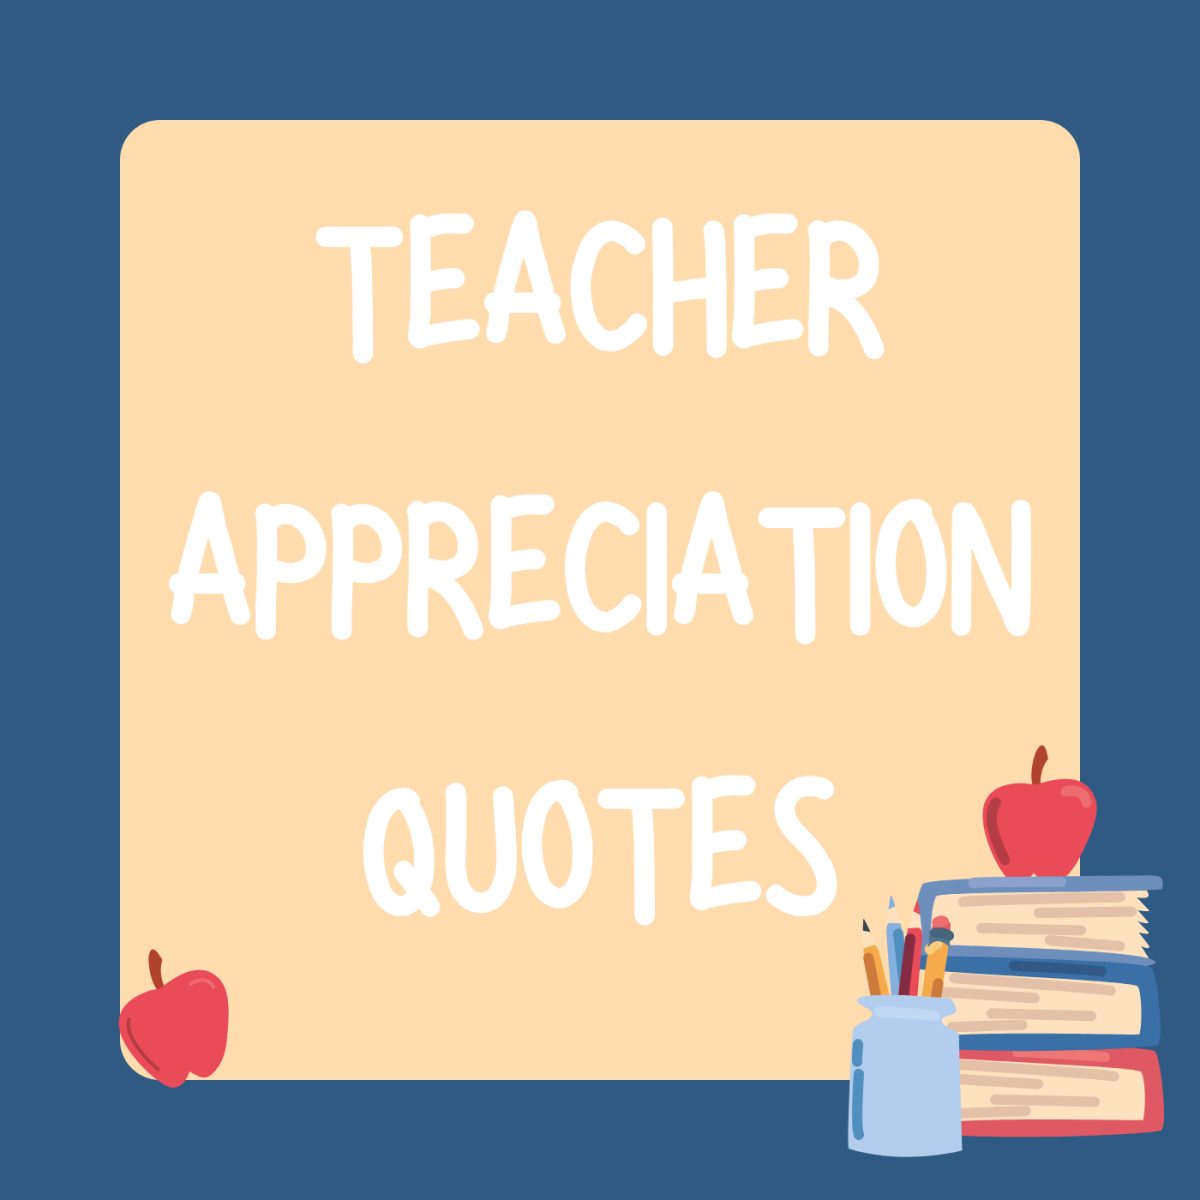 quotes-giving-teachers-some-well-deserved-honor